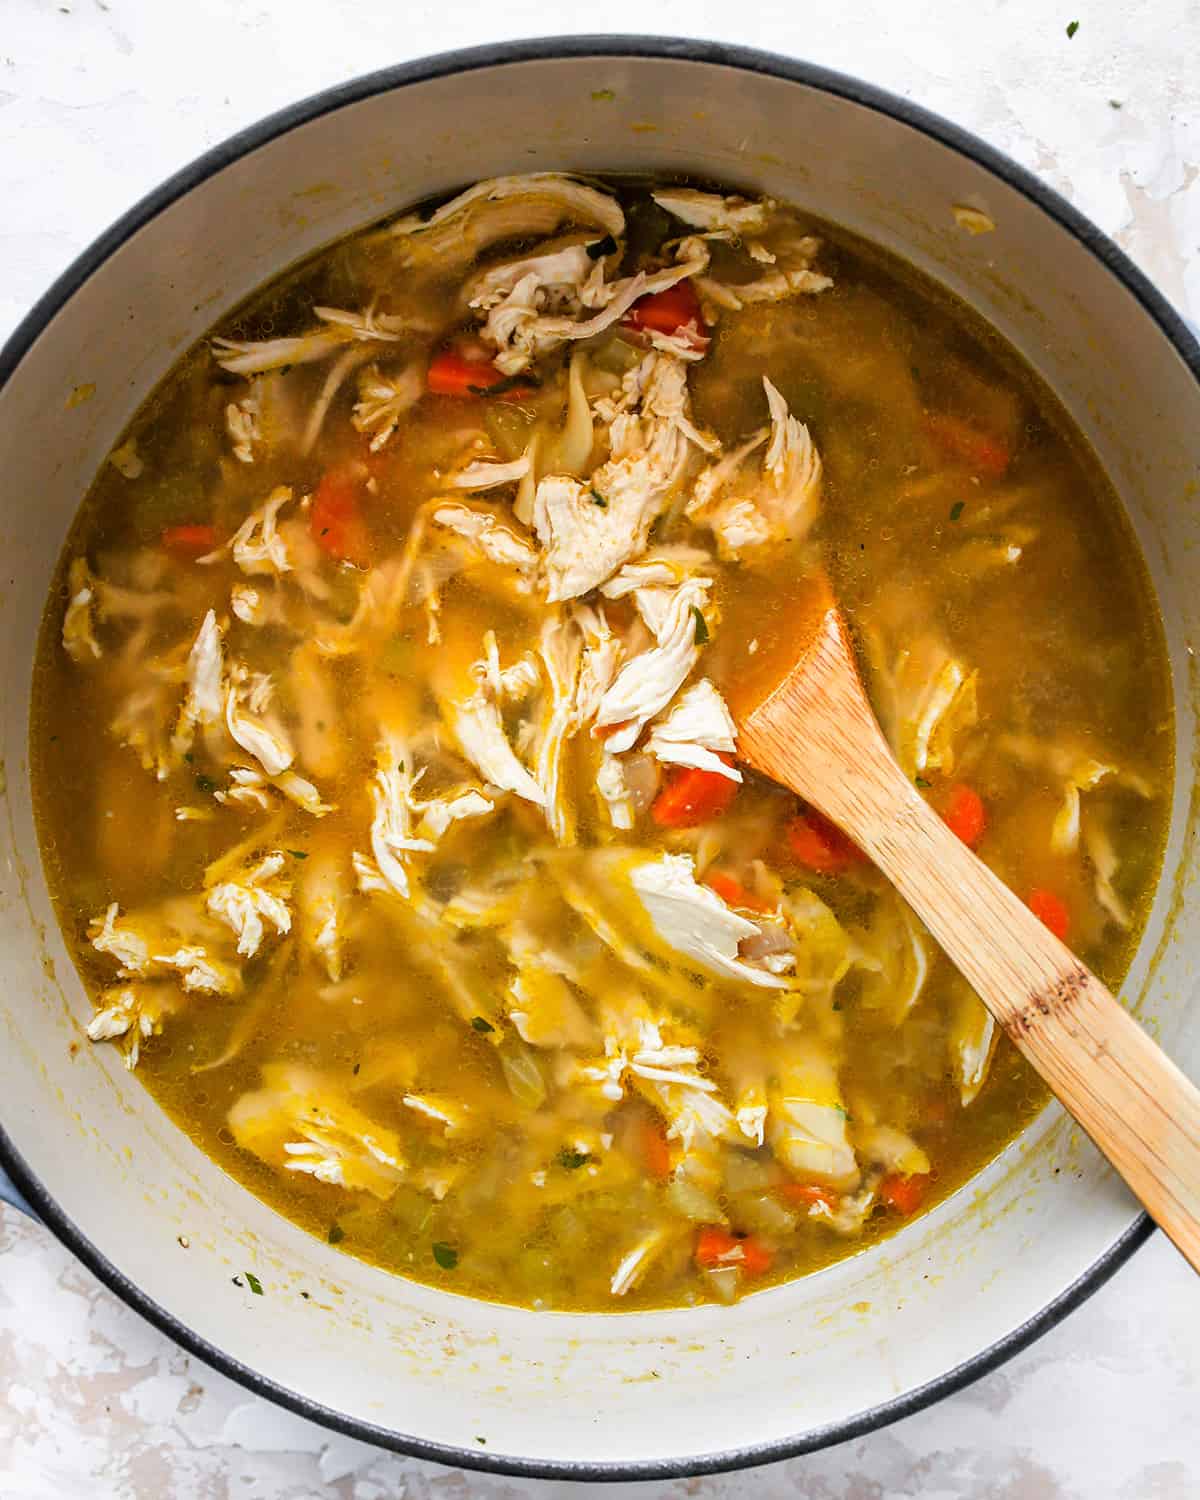 How to Make Chicken Noodle Soup - returning shredded chicken to the pot to cook